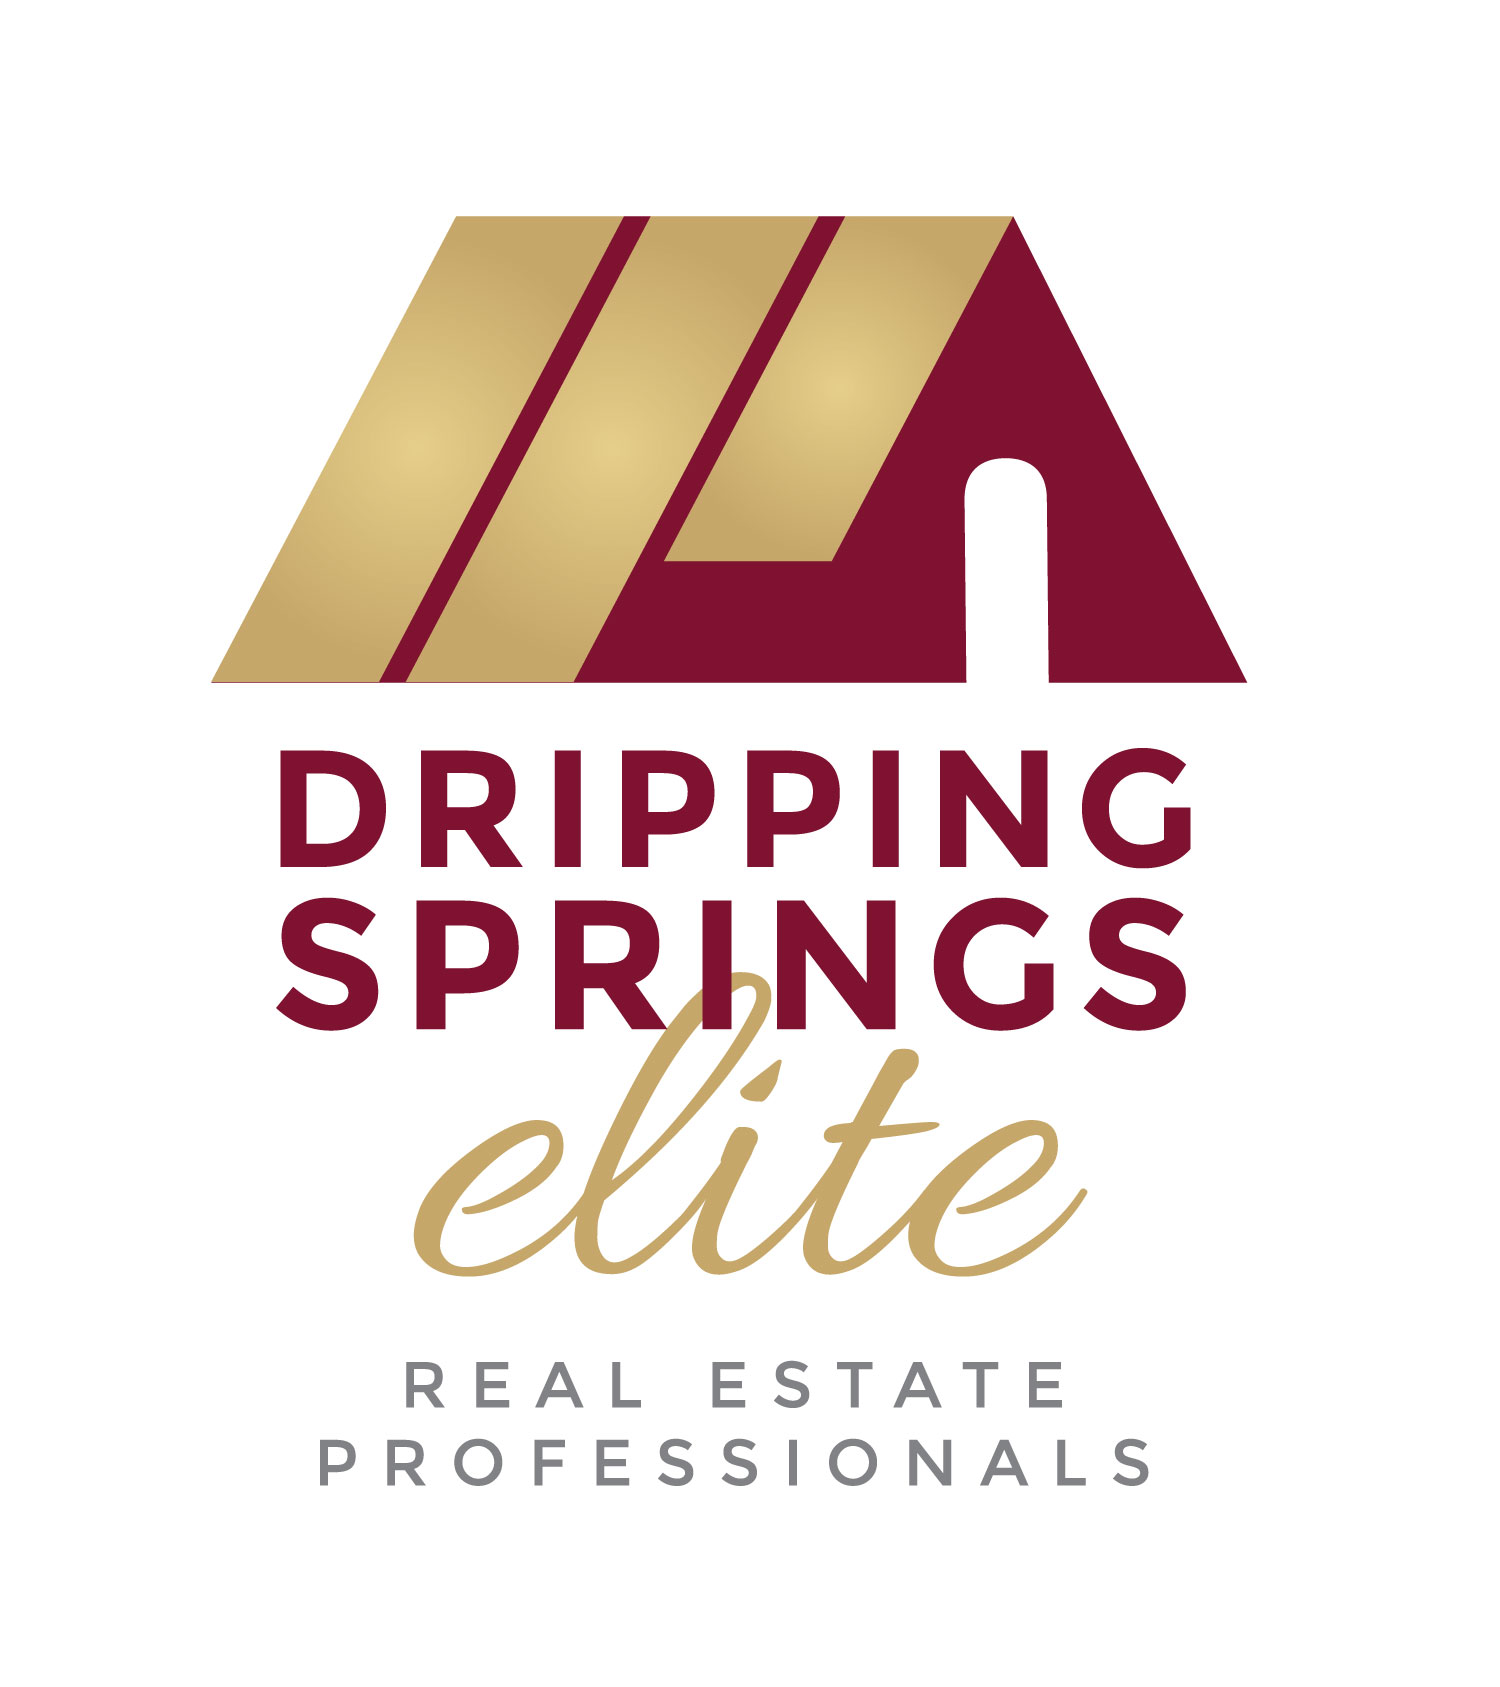 The logo of DROPPING SPRINGS elite